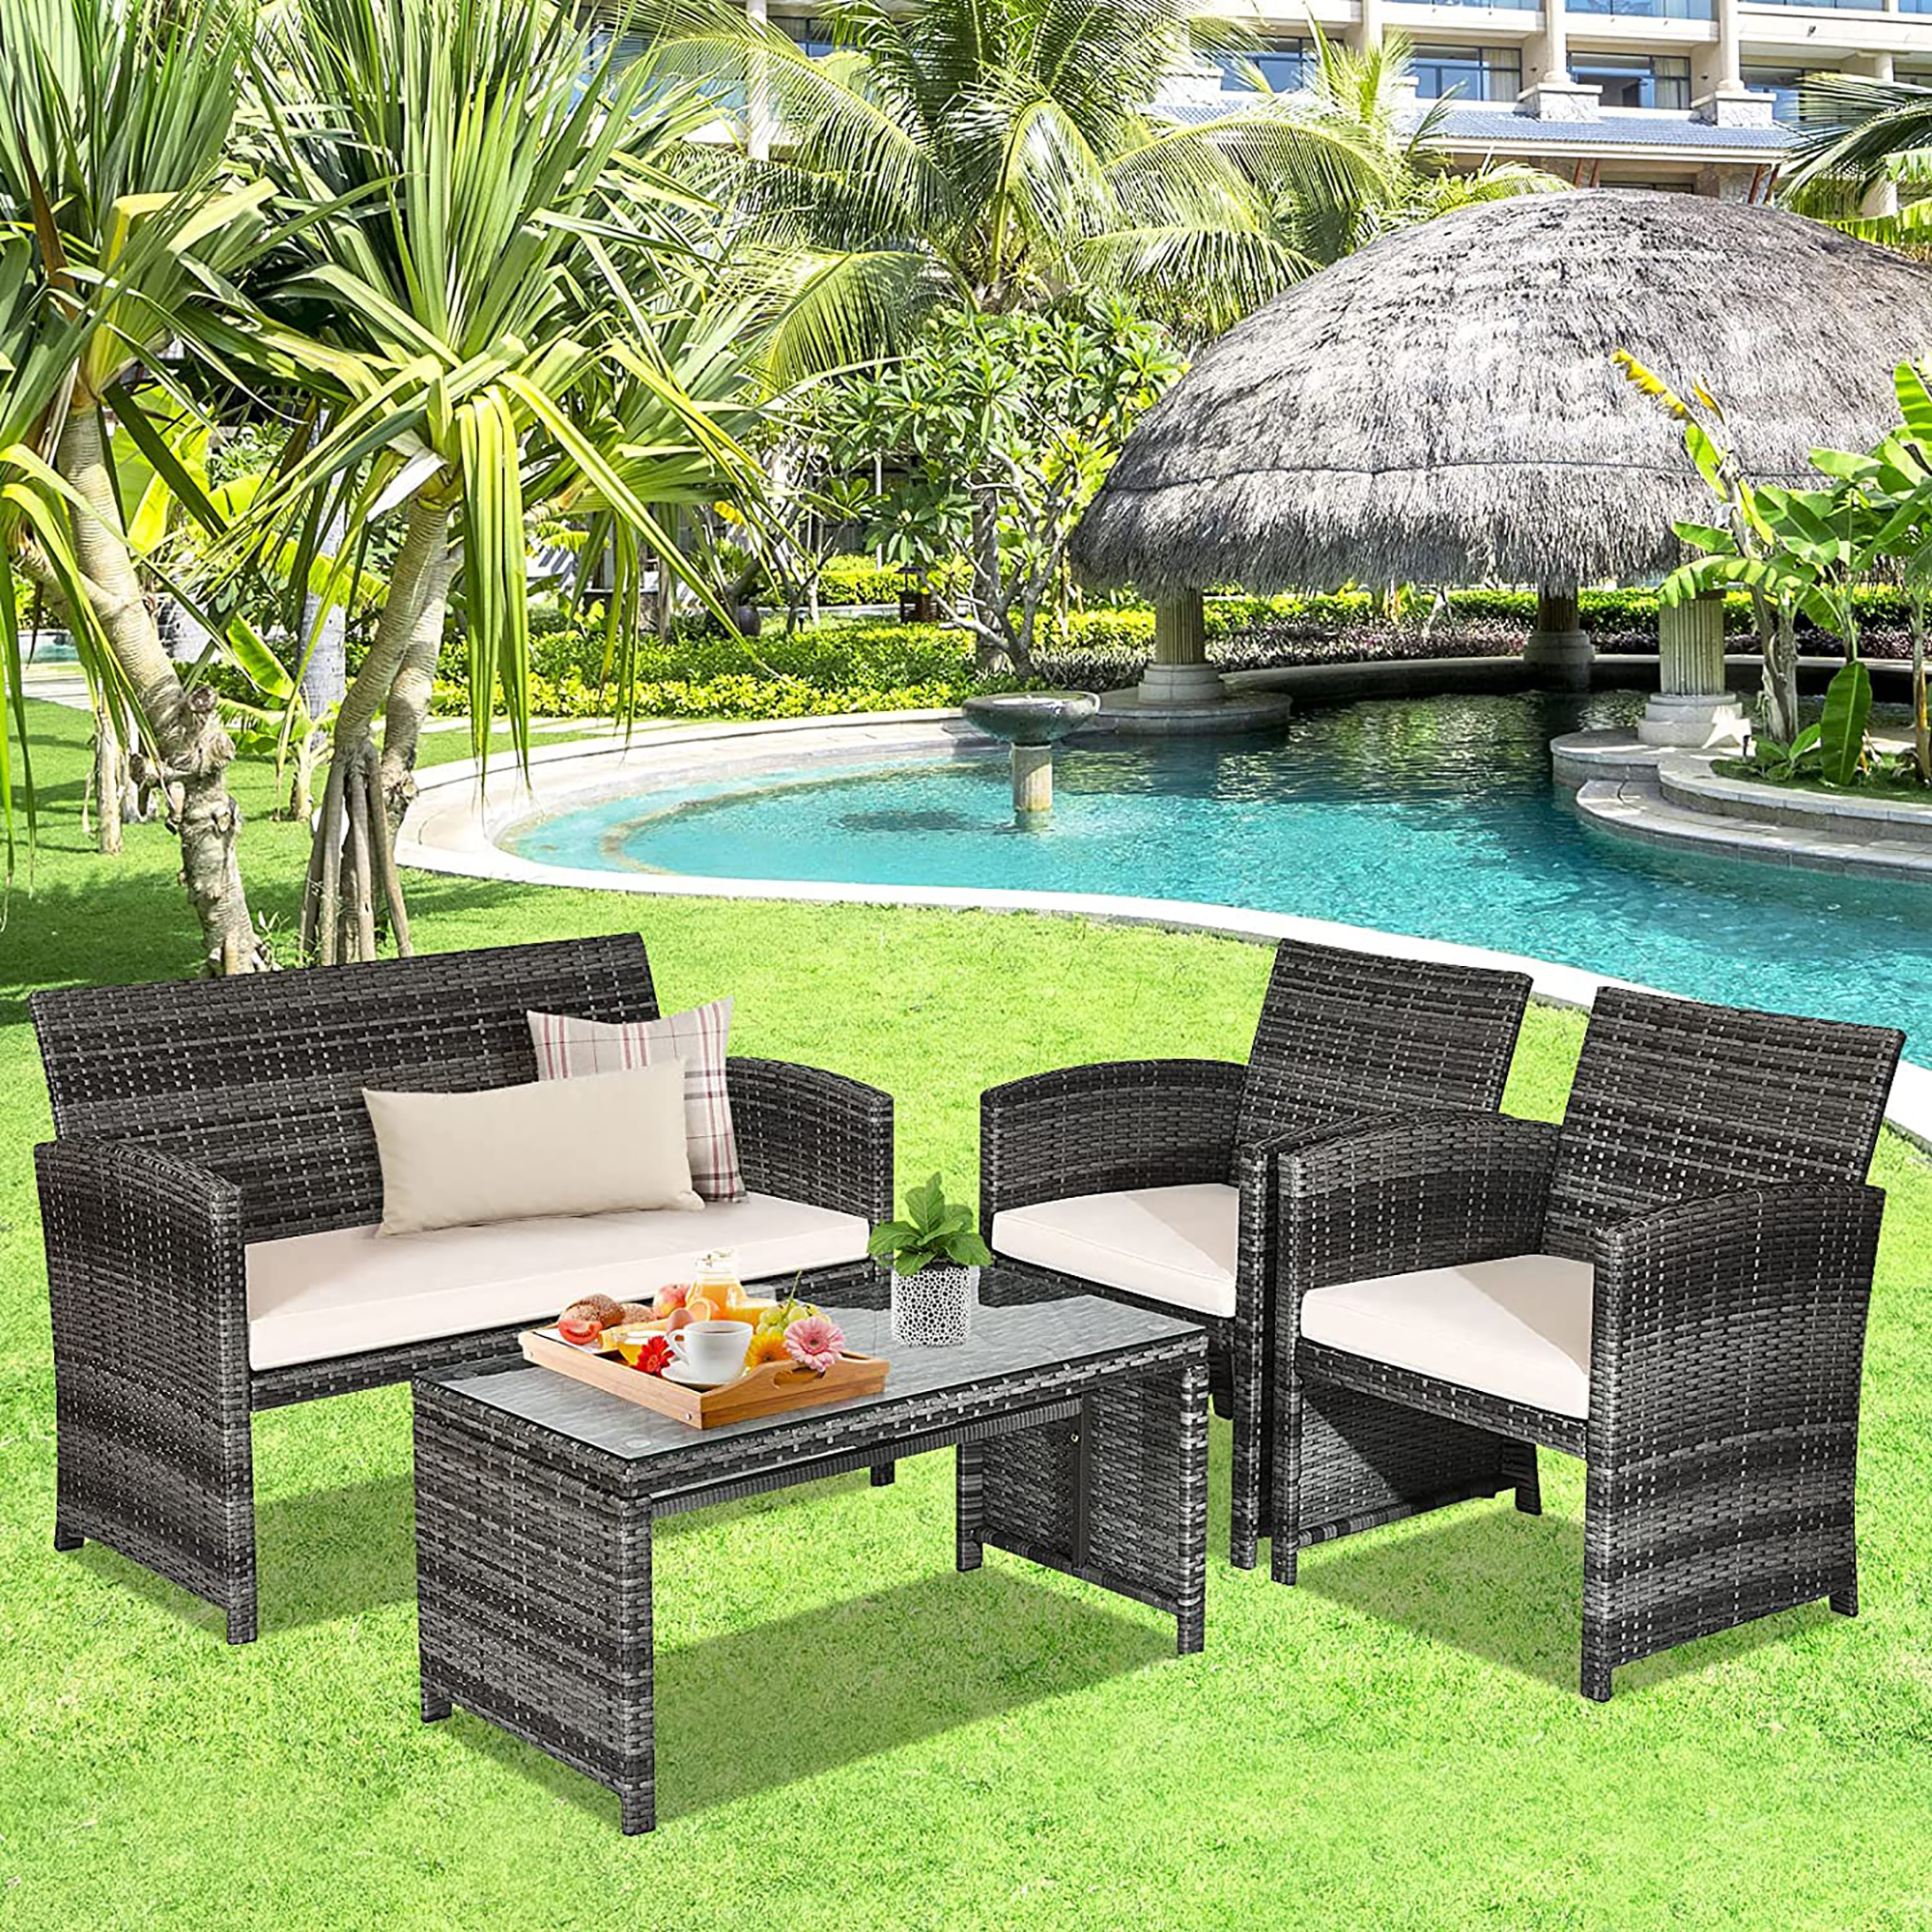 Costway 4PCS Patio Rattan Furniture Set Conversation Glass Table Top Cushioned Sofa Beige - image 1 of 10